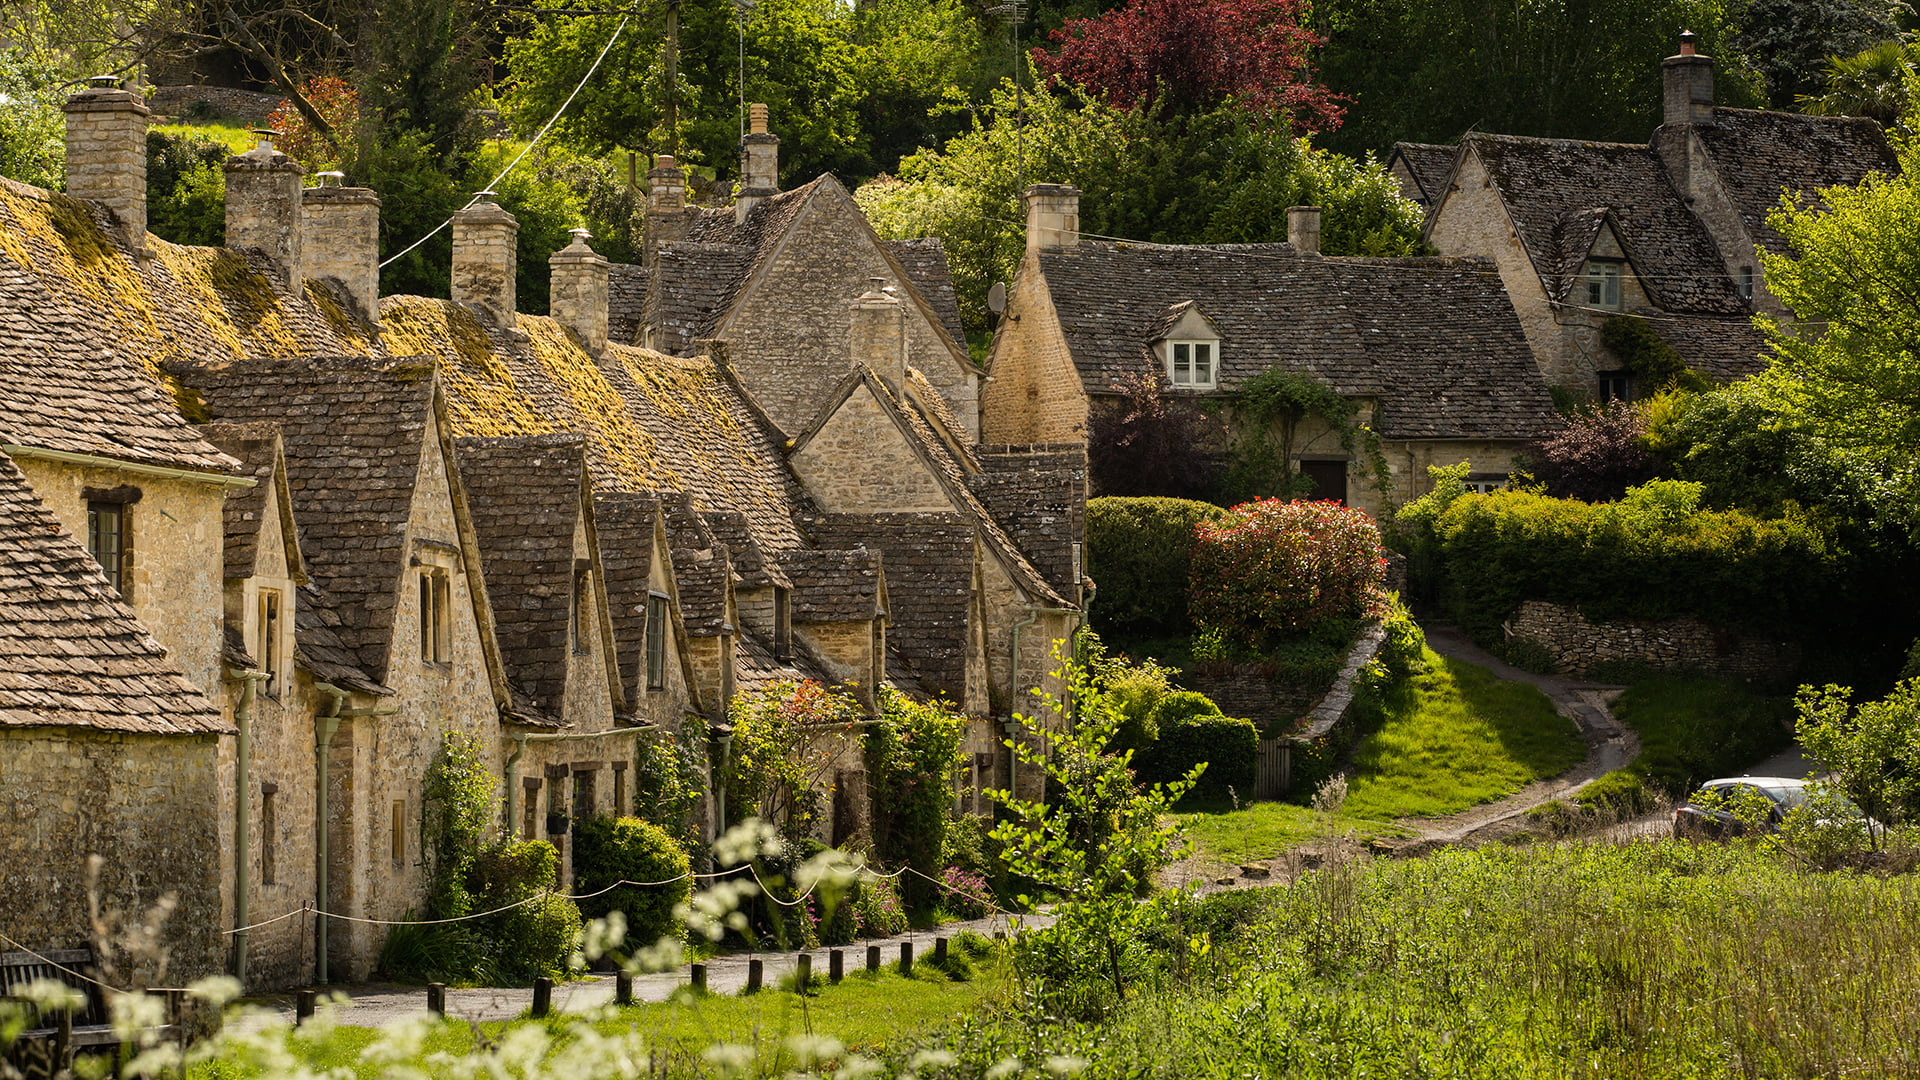 Luxury Cotswold tours and holidays